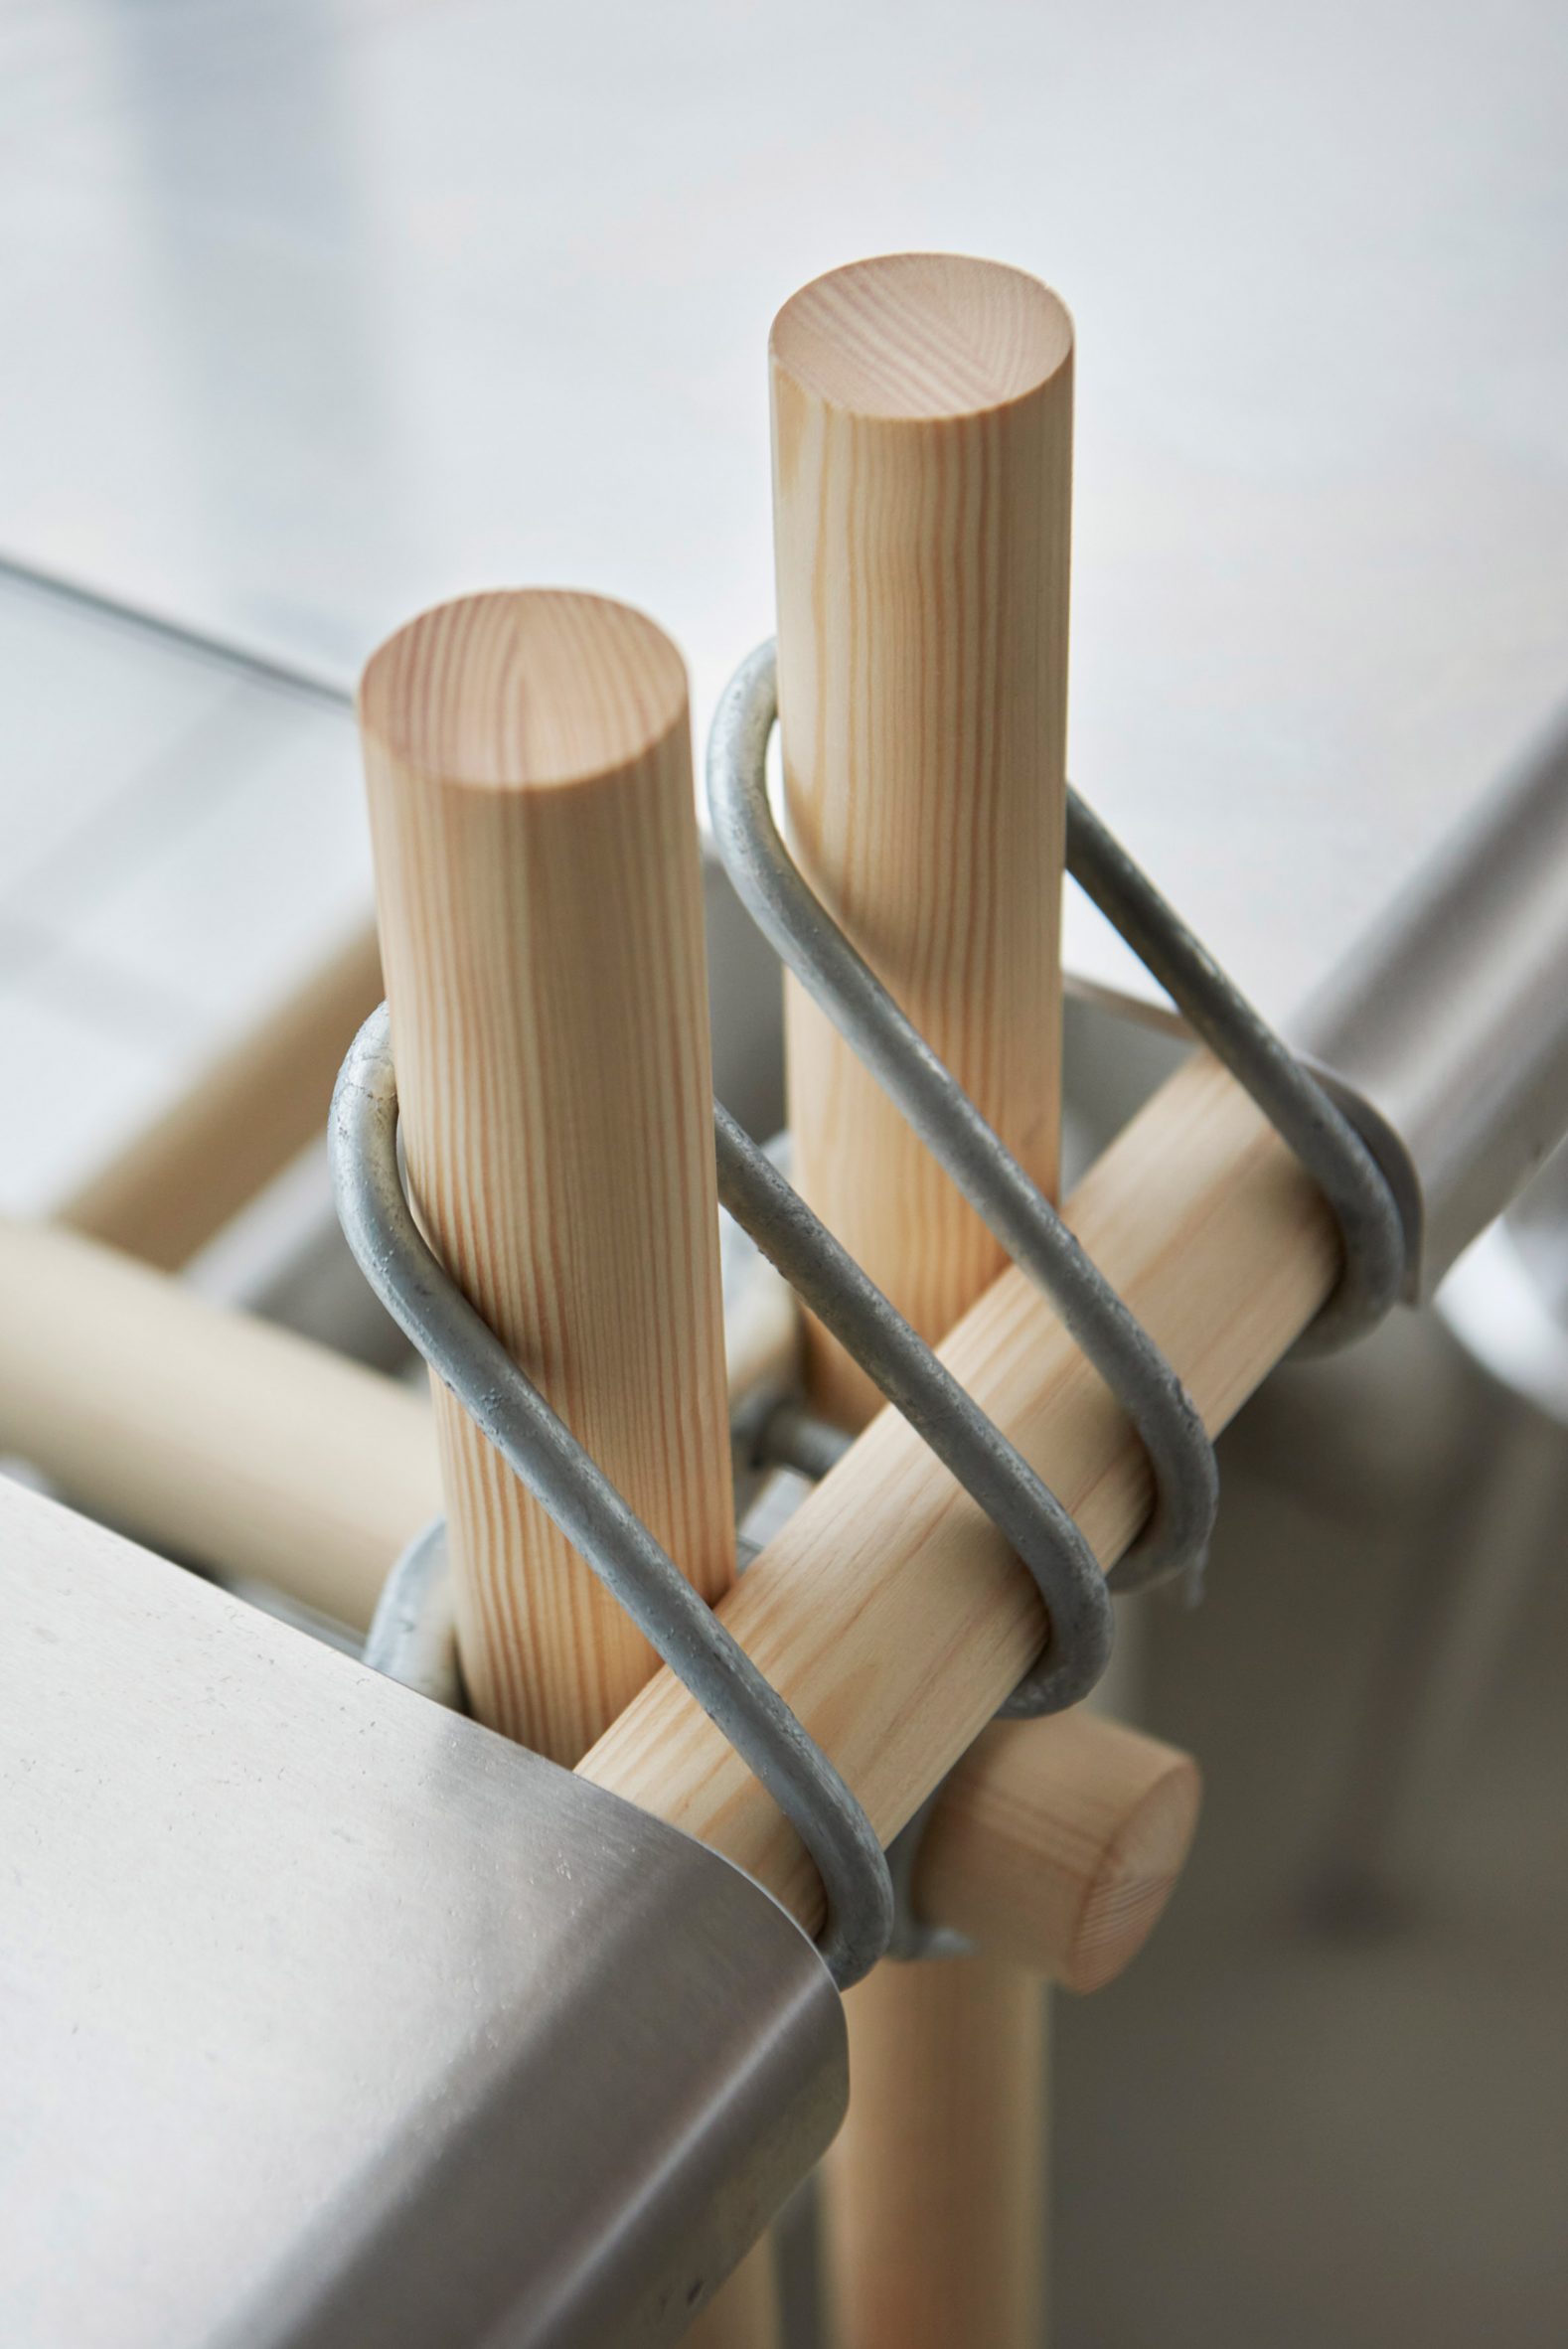 Close-up photo of looped metal joining elements holding cylindrical wooden parts together to make a seating frame